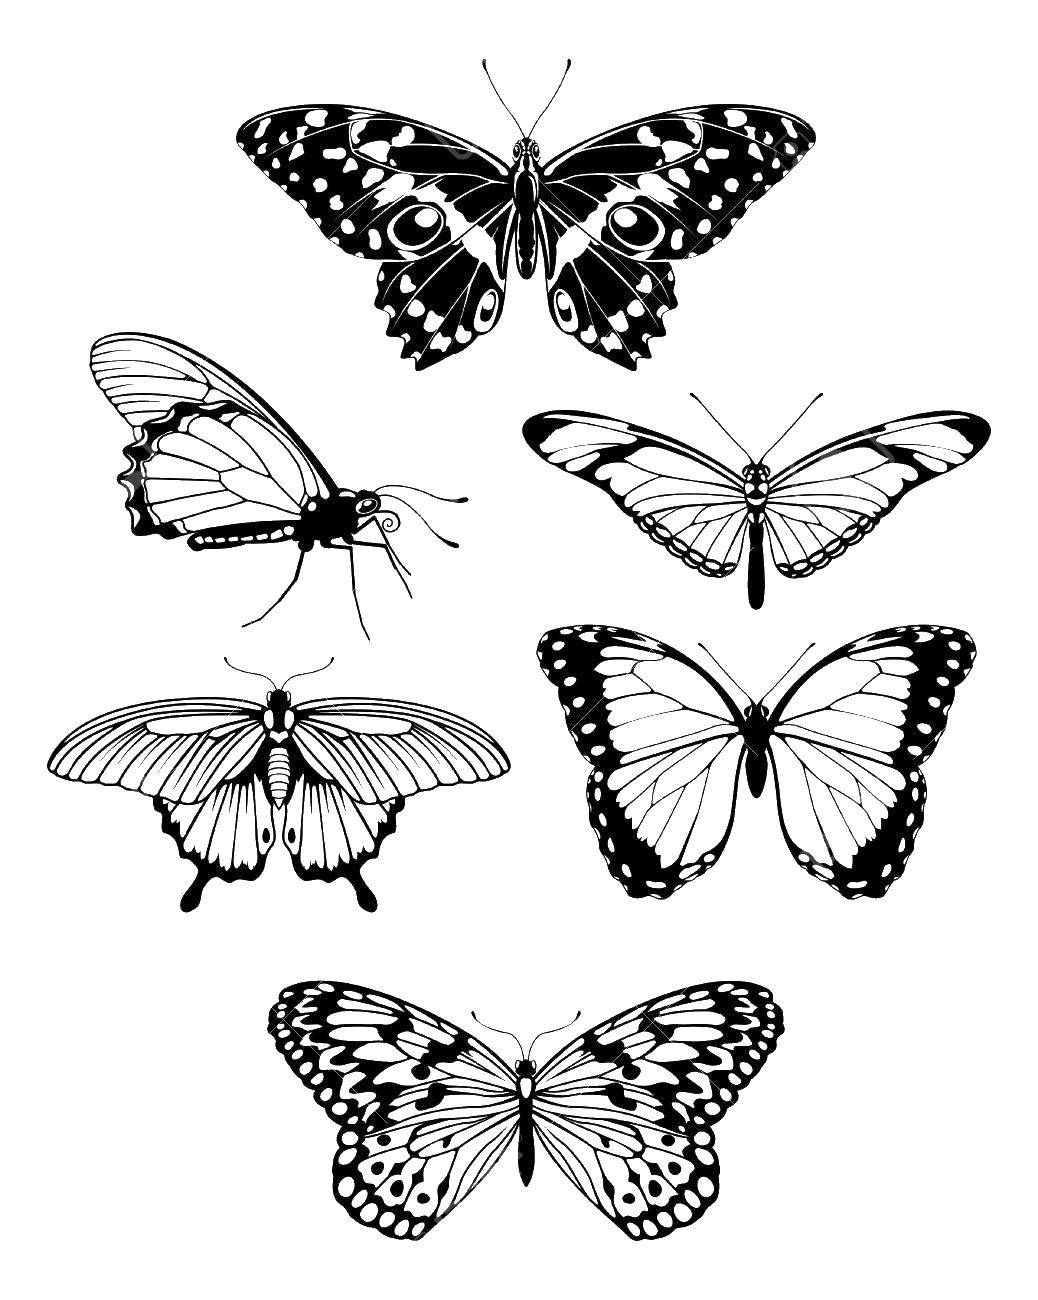 Coloring Different butterflies. Category butterflies. Tags:  Butterfly.